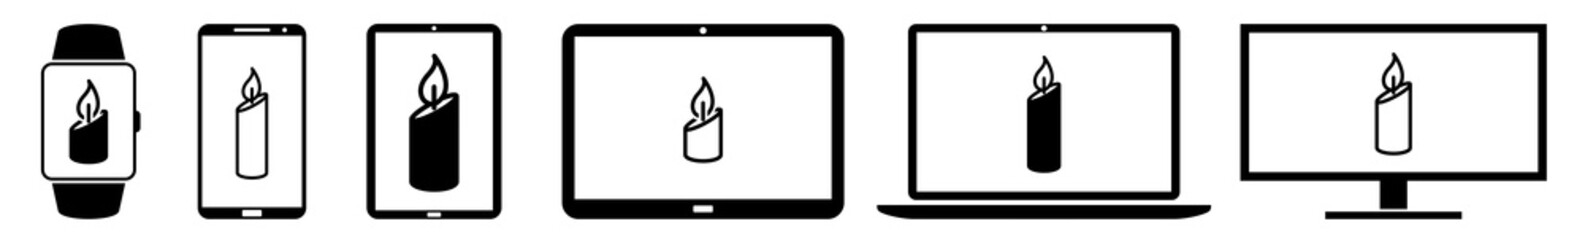 Display Candle, Birthday, Flame, Christmas, Light, Burn Icon Devices Set | Web Screen Device Online | Laptop Vector Illustration | Mobile Phone | PC Computer Smartphone Tablet Sign Isolated